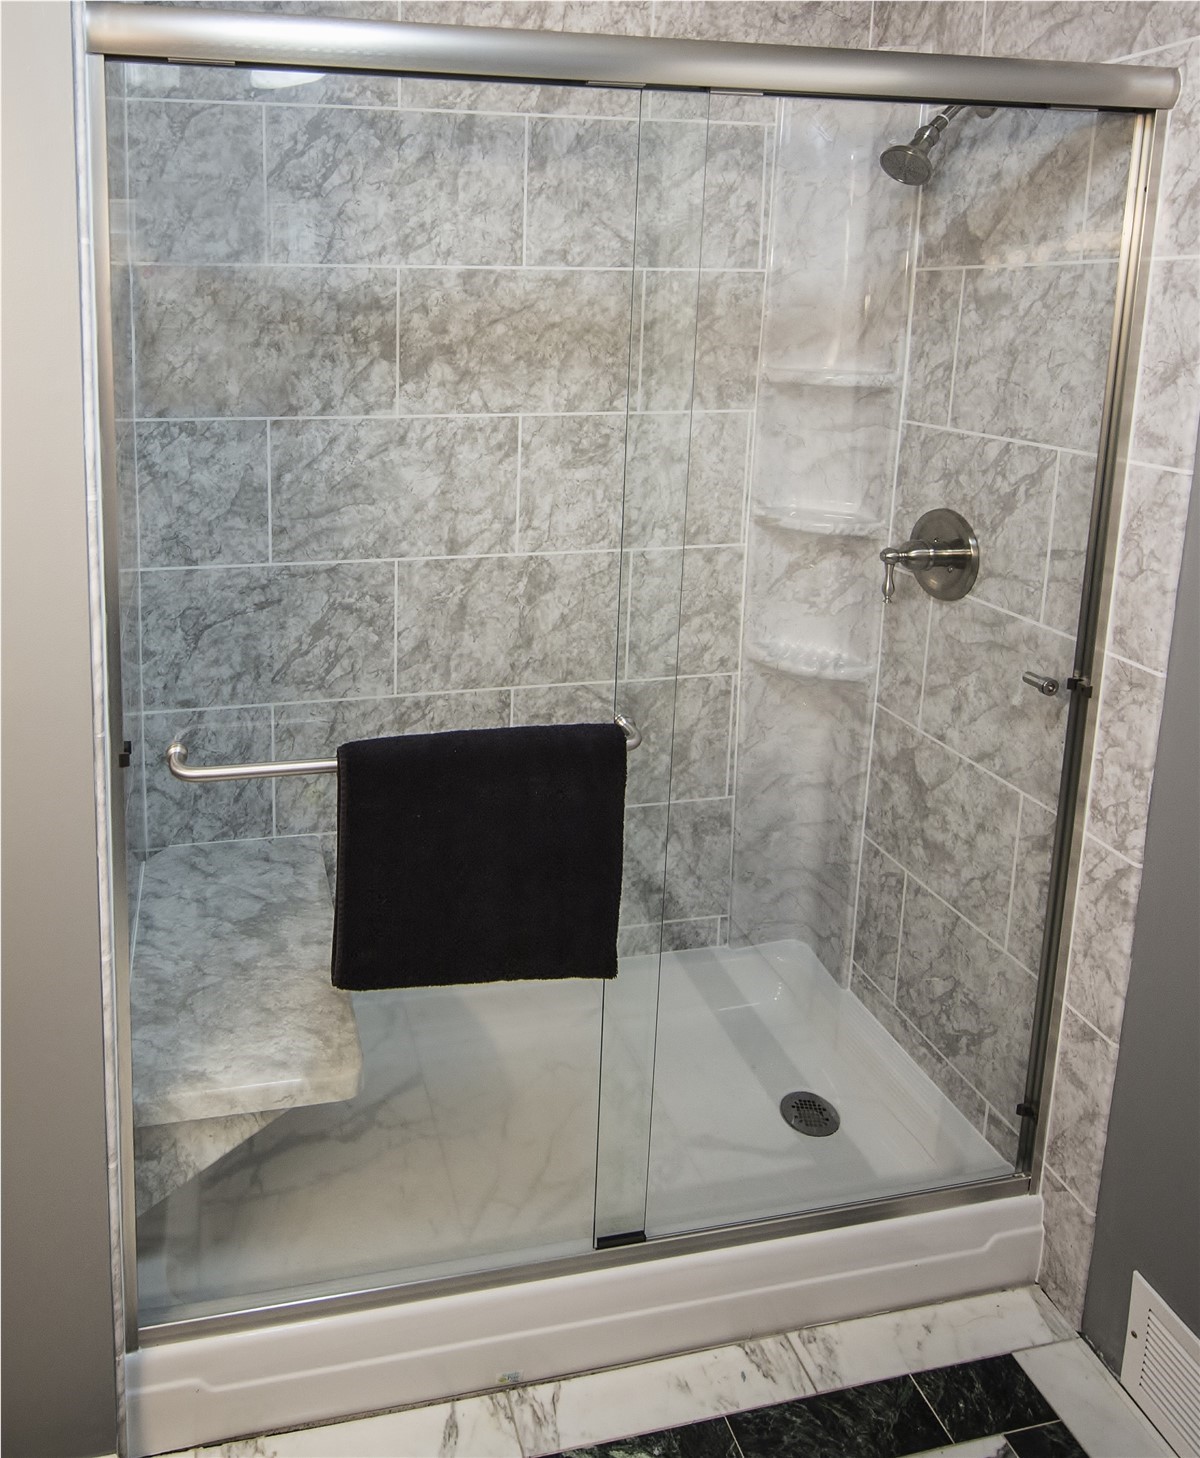 3 Reasons You Need to Update Your Old Bathtub to a New Shower!